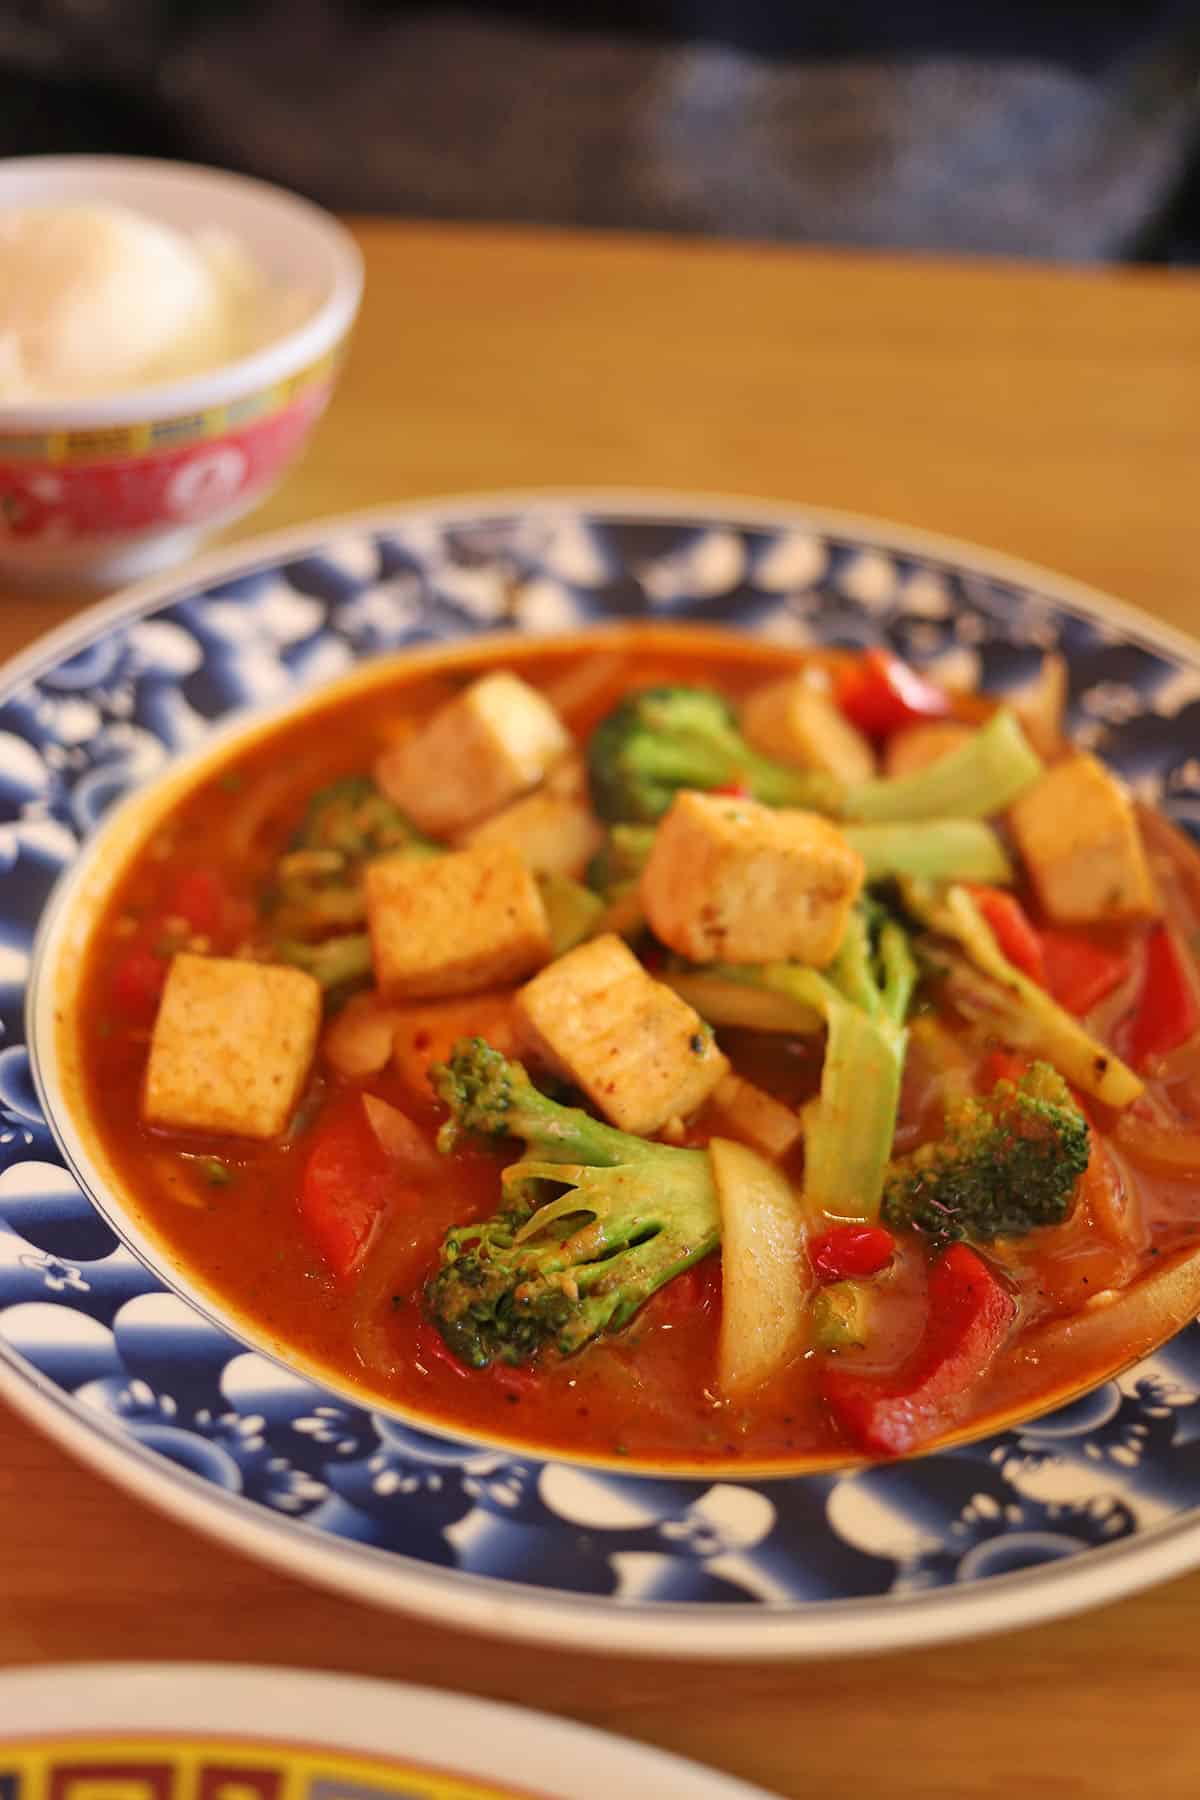 Tofu and broccoli in curry peanut sauce on blue plate.